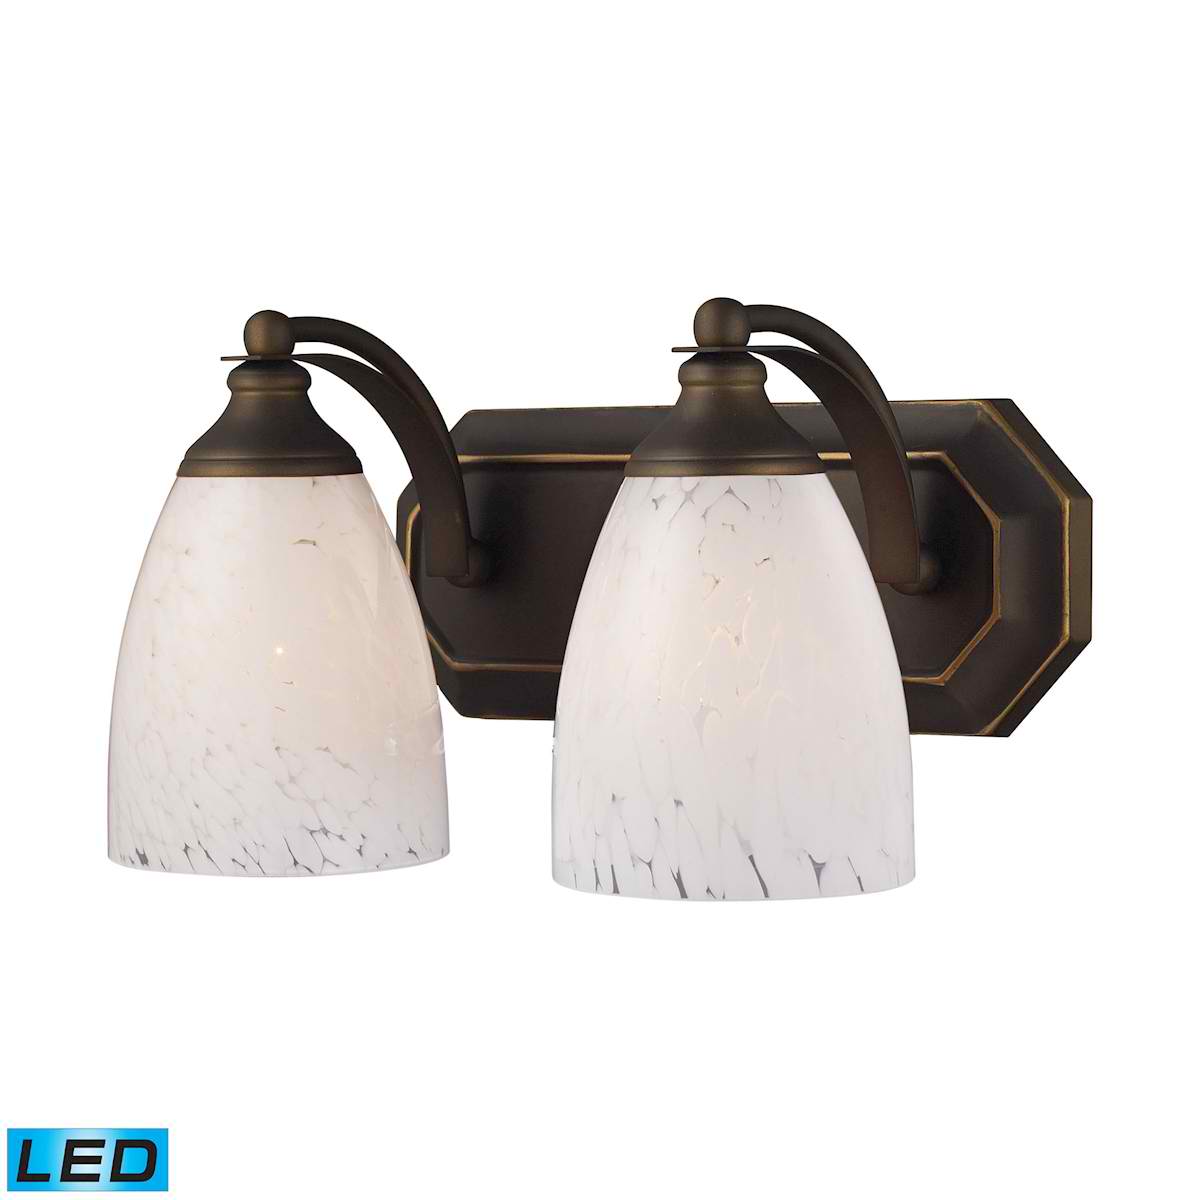 2 Light Vanity in Aged Bronze and Snow White Glass - LED, 800 Lumens (1600 Lumens Total) with Full Scale